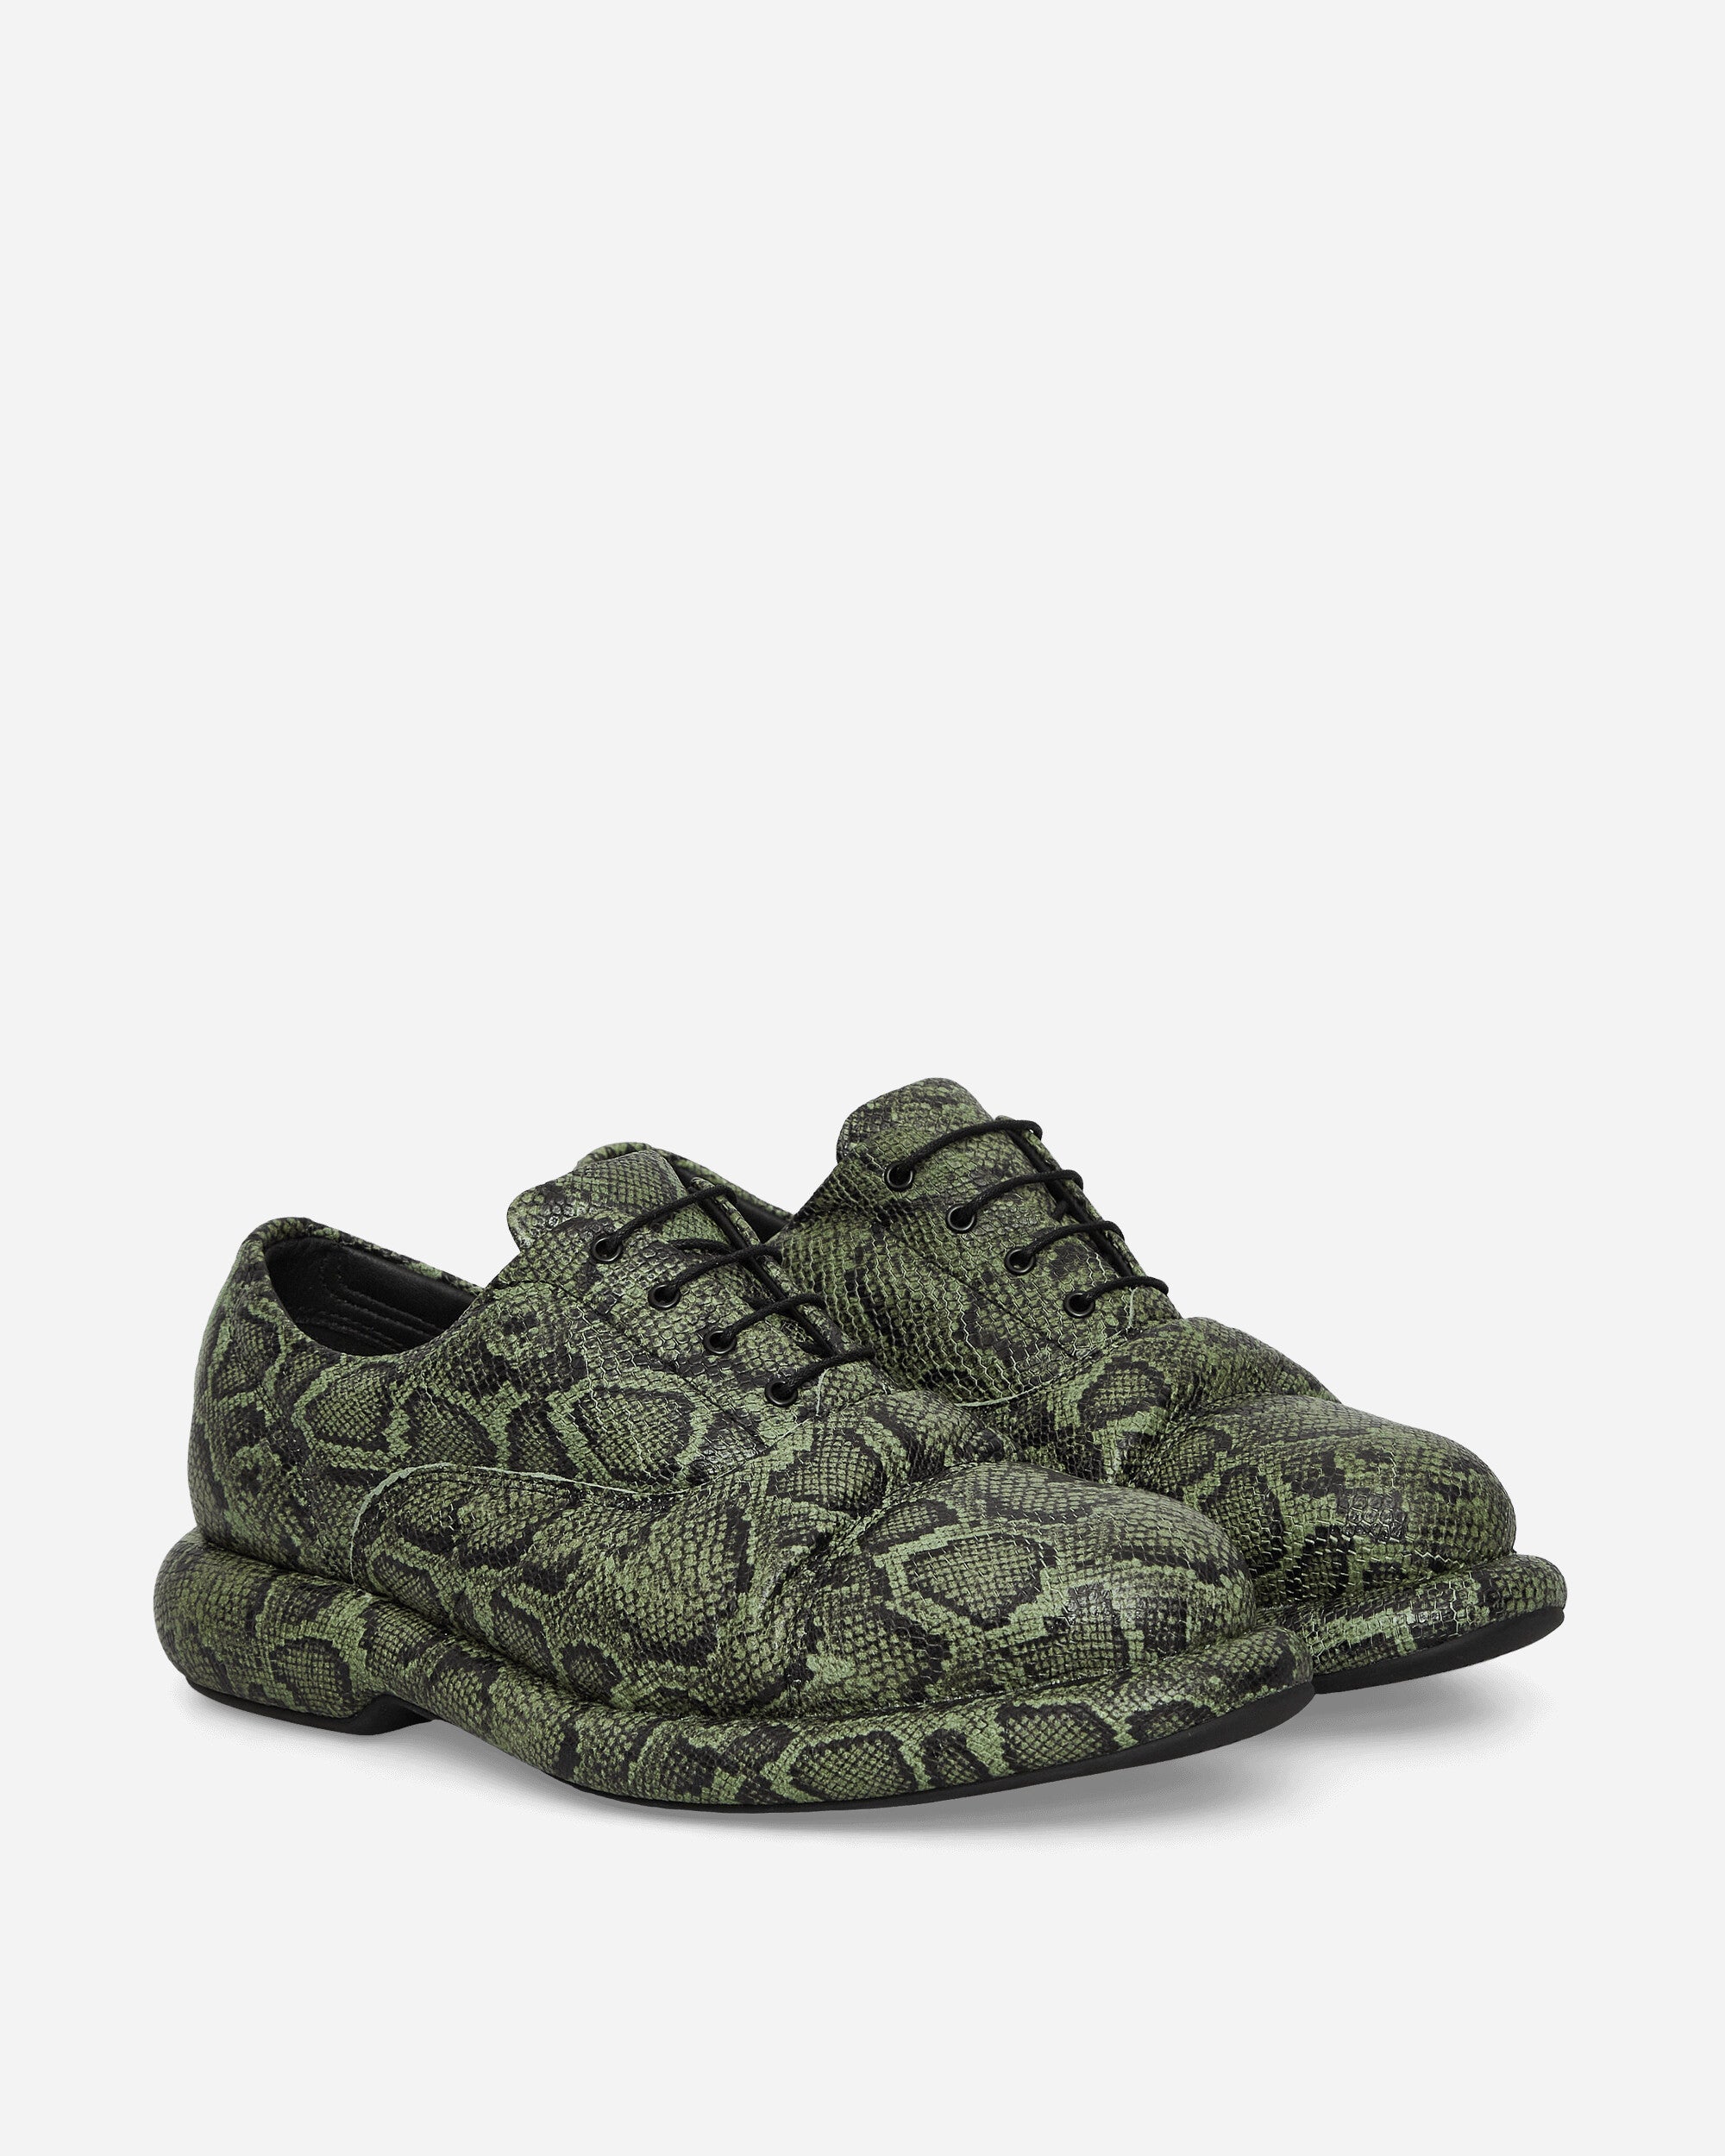 Martine Rose Leather Oxford Green Snake